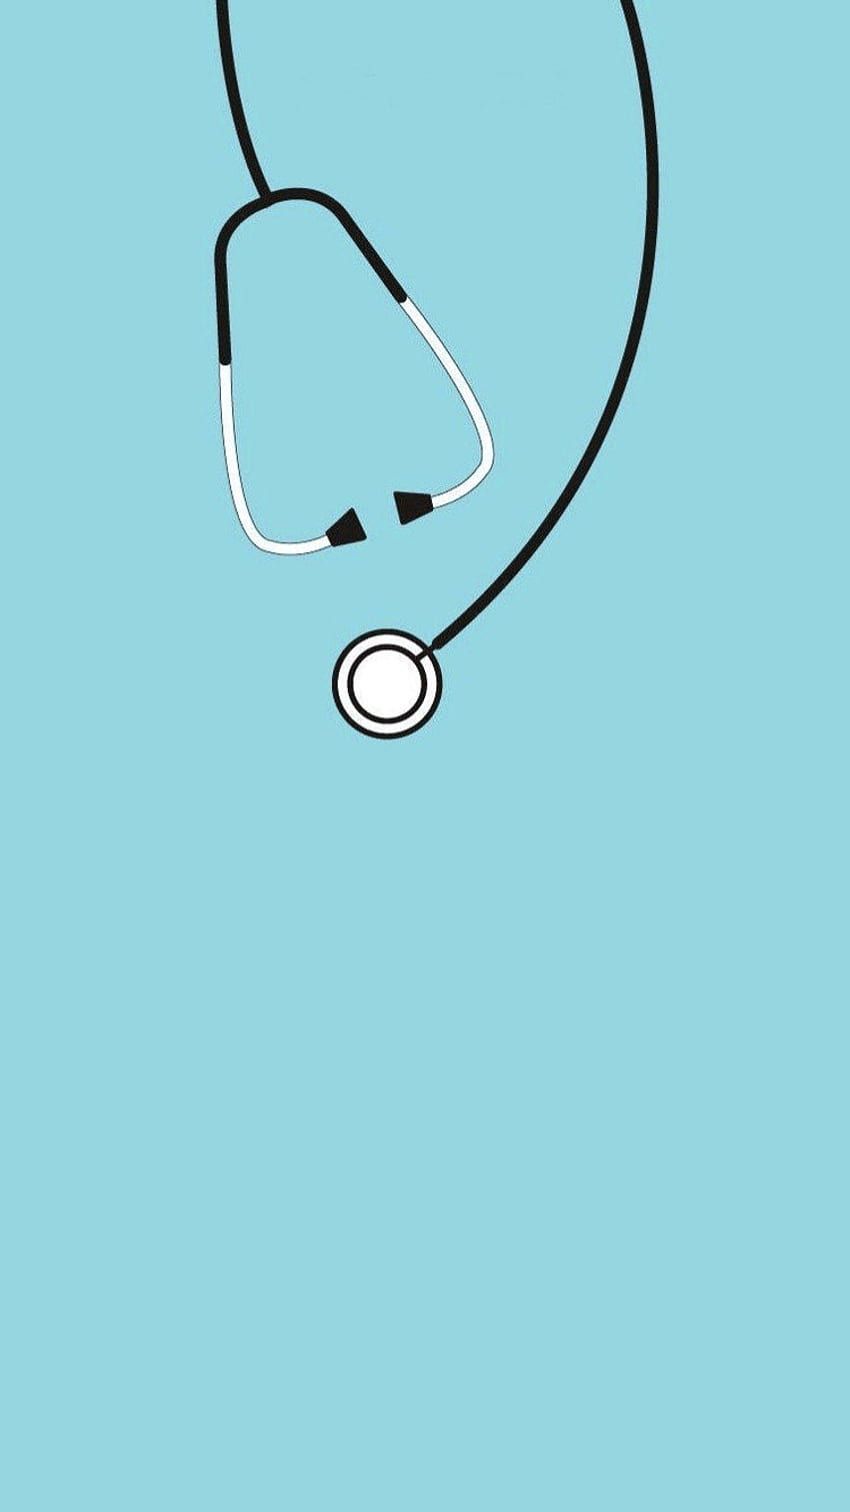 A stethoscope is shown on blue background - 